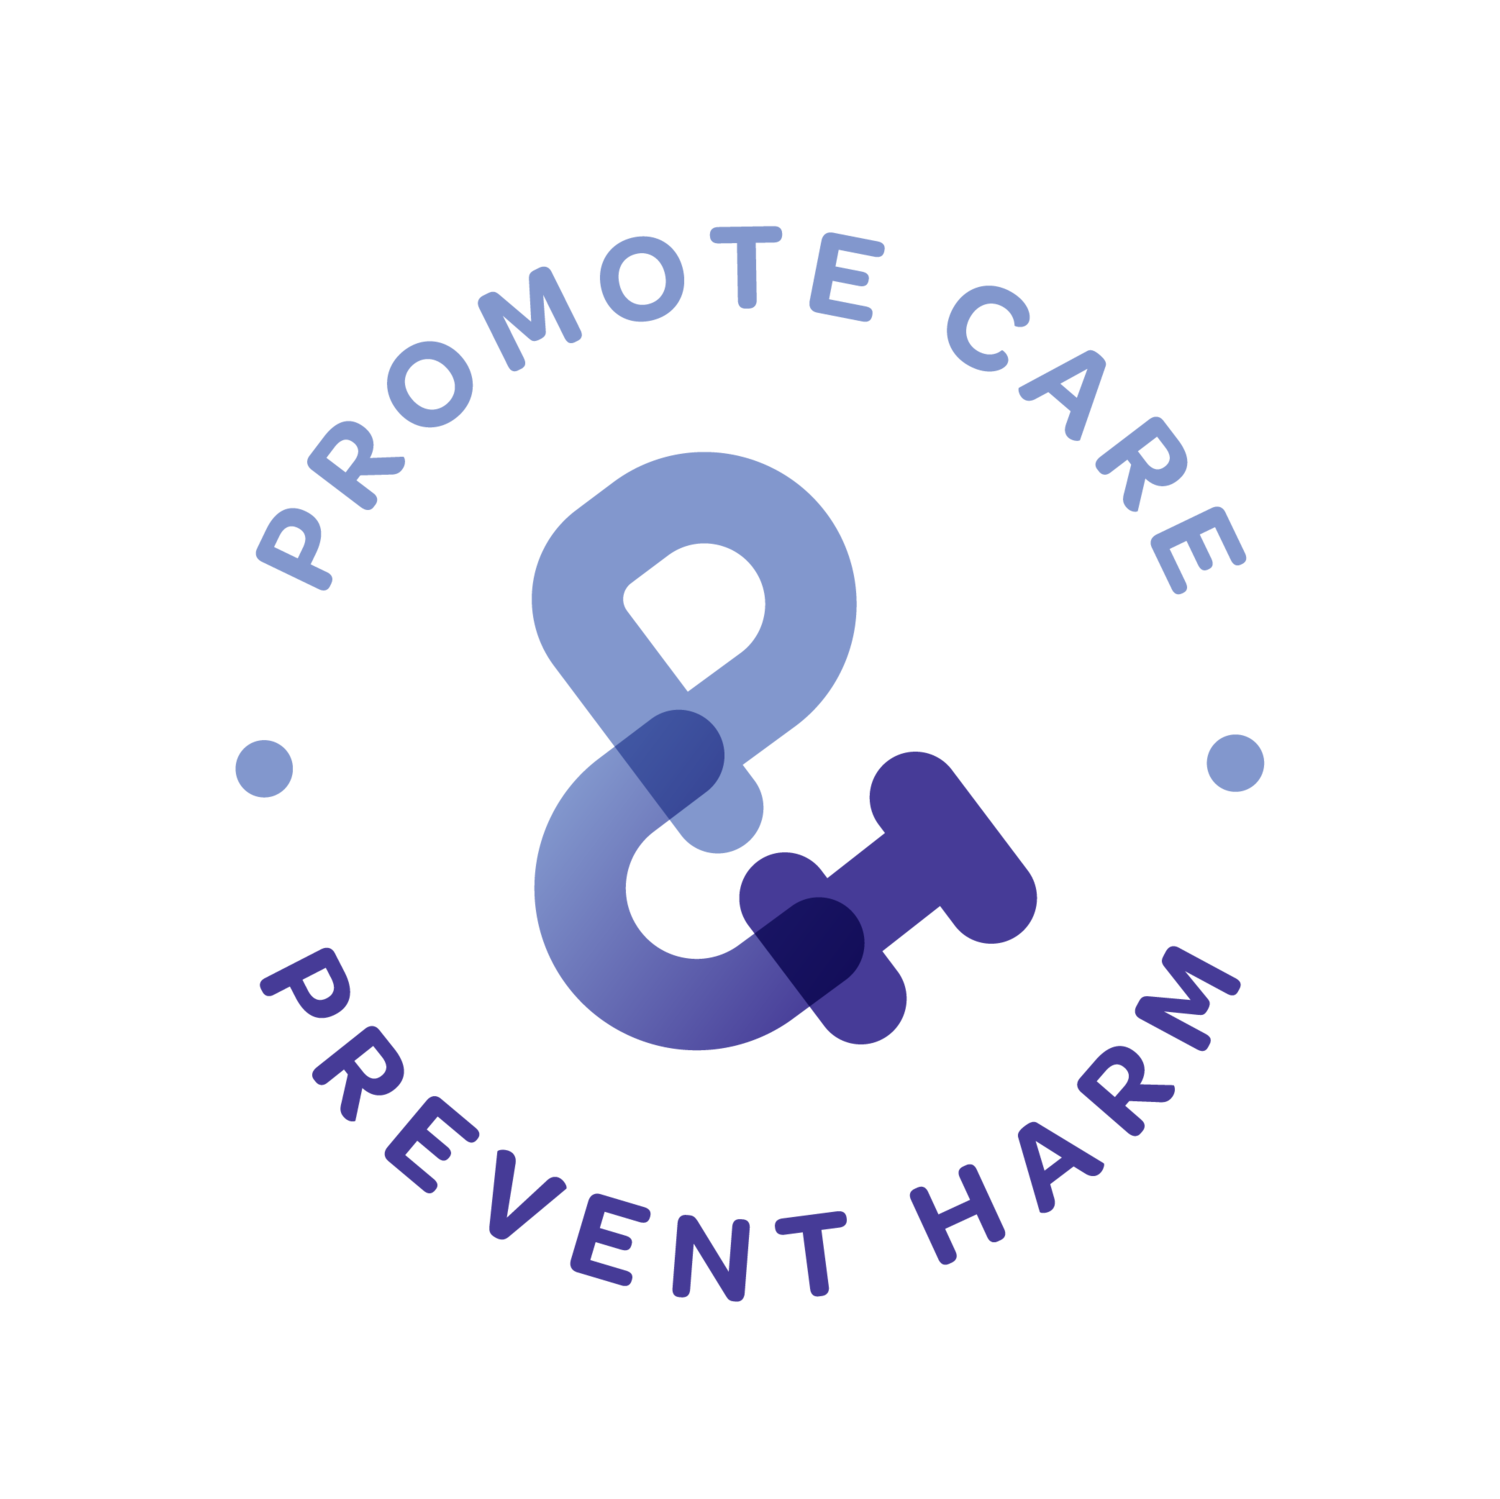 Promote Care and Prevent Harm